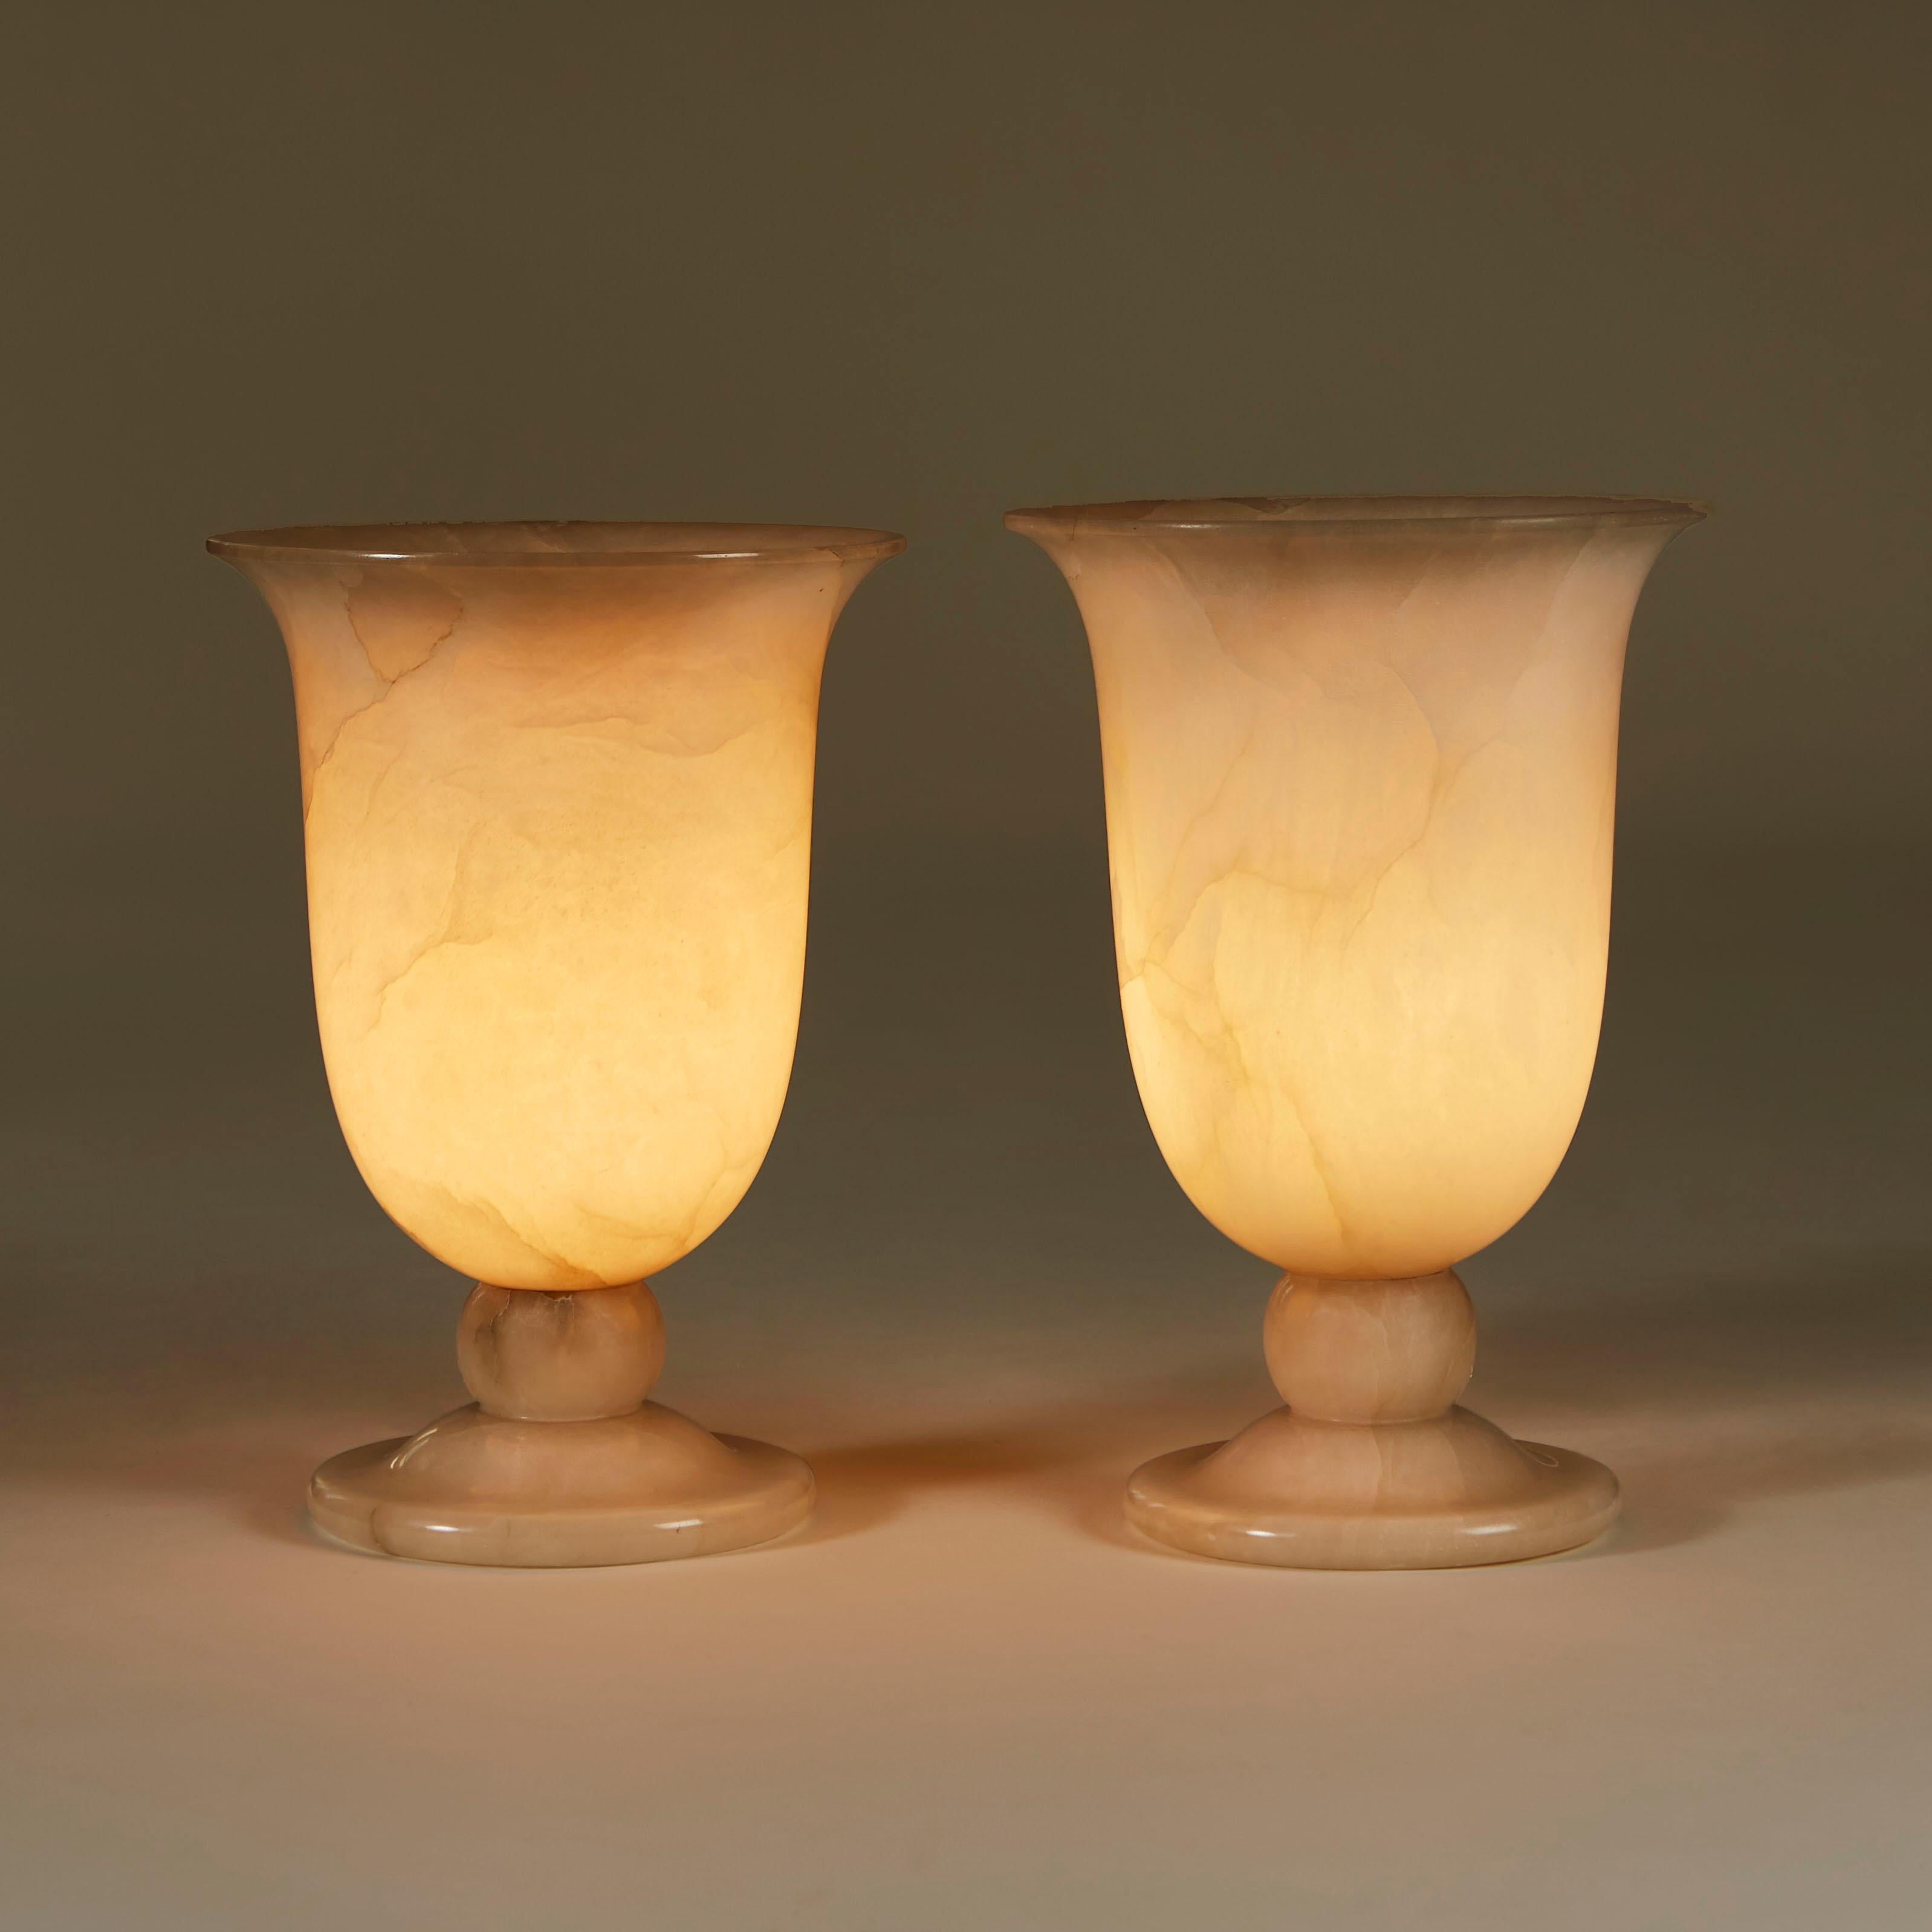 Substantial pair of 1950s Italian alabaster urn lamps. The elegantly carved base has ball detailing and open curved vase shaped top. The patina is enhanced by subtle markings in the alabaster and results in a flattering warm glow.